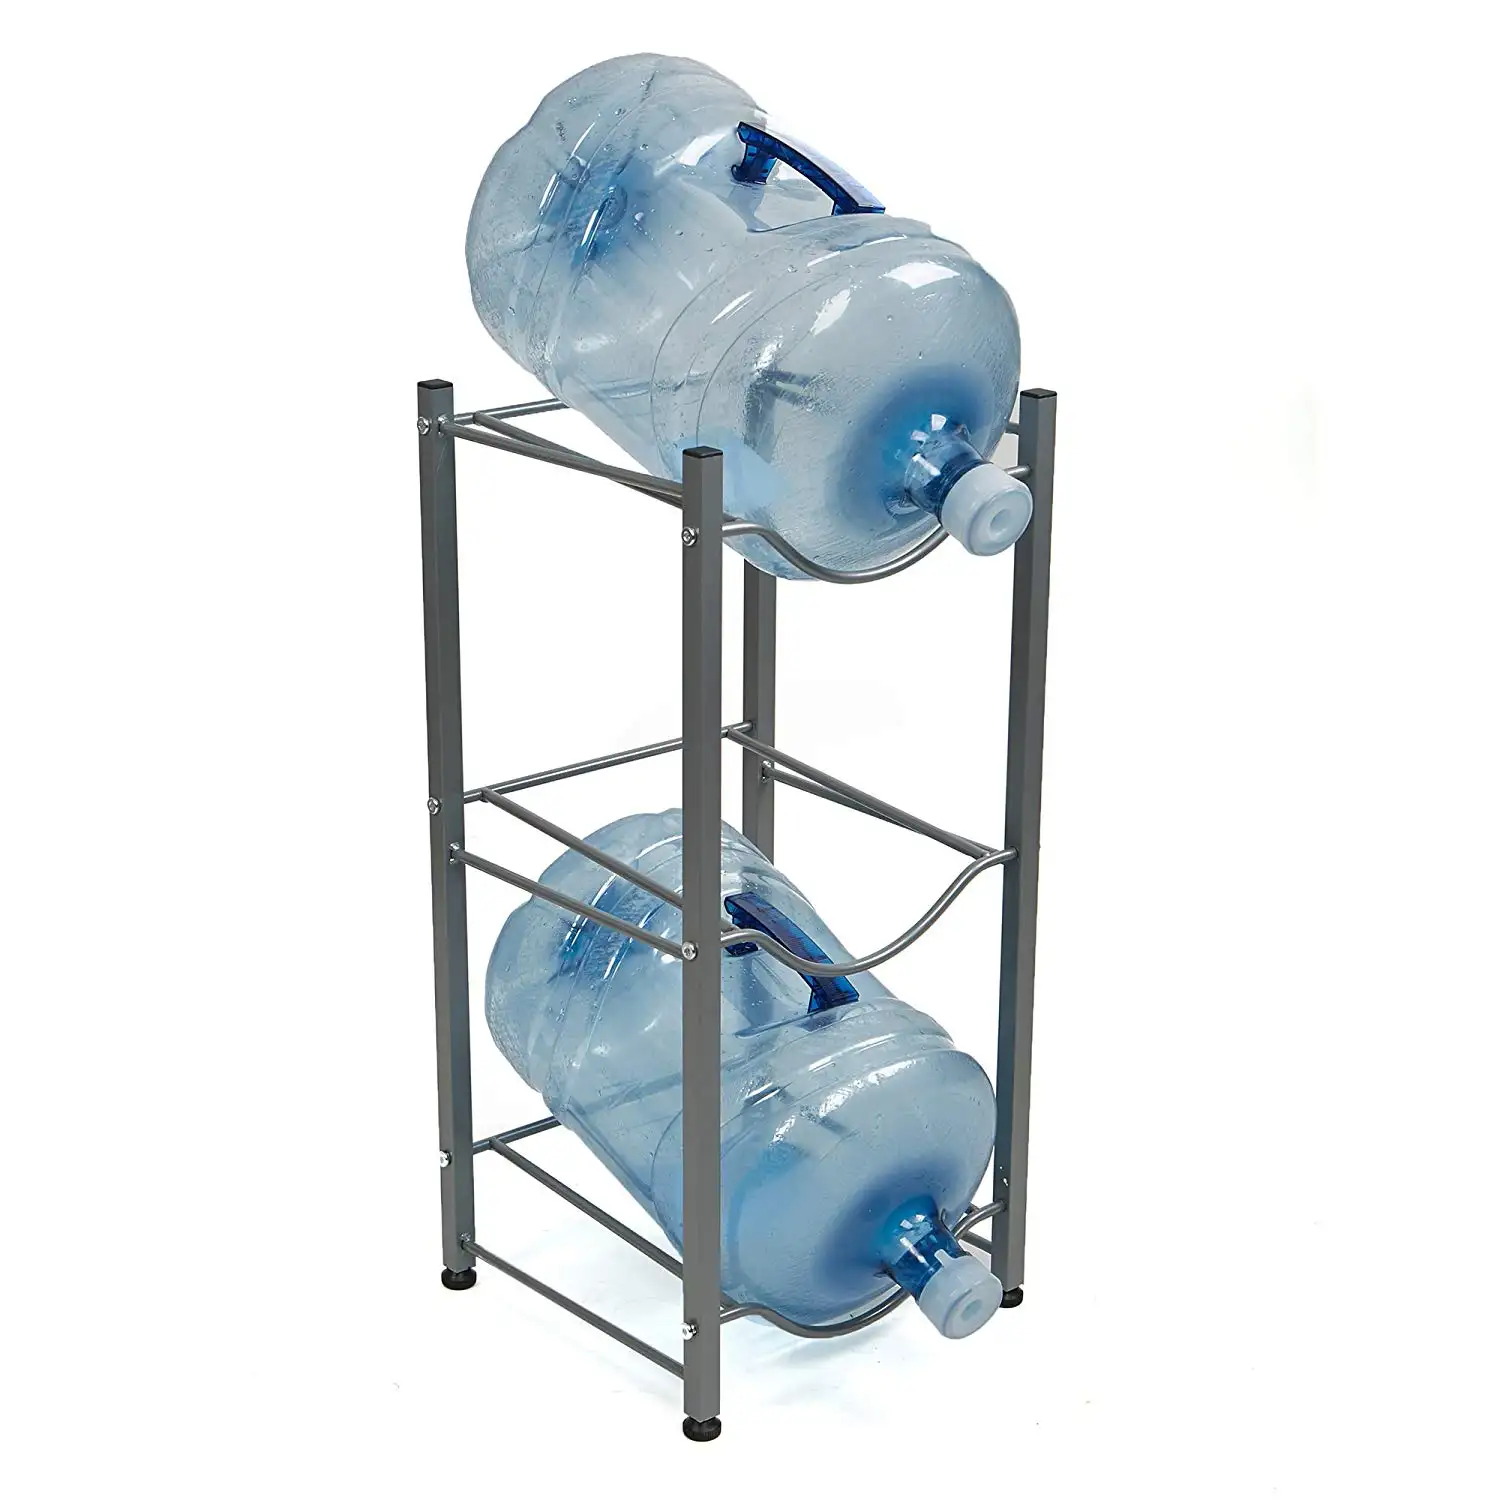 Home supply Wideny powder coated wire metal collapsible water bottle 5 gallon floor standing water dispenser shelf